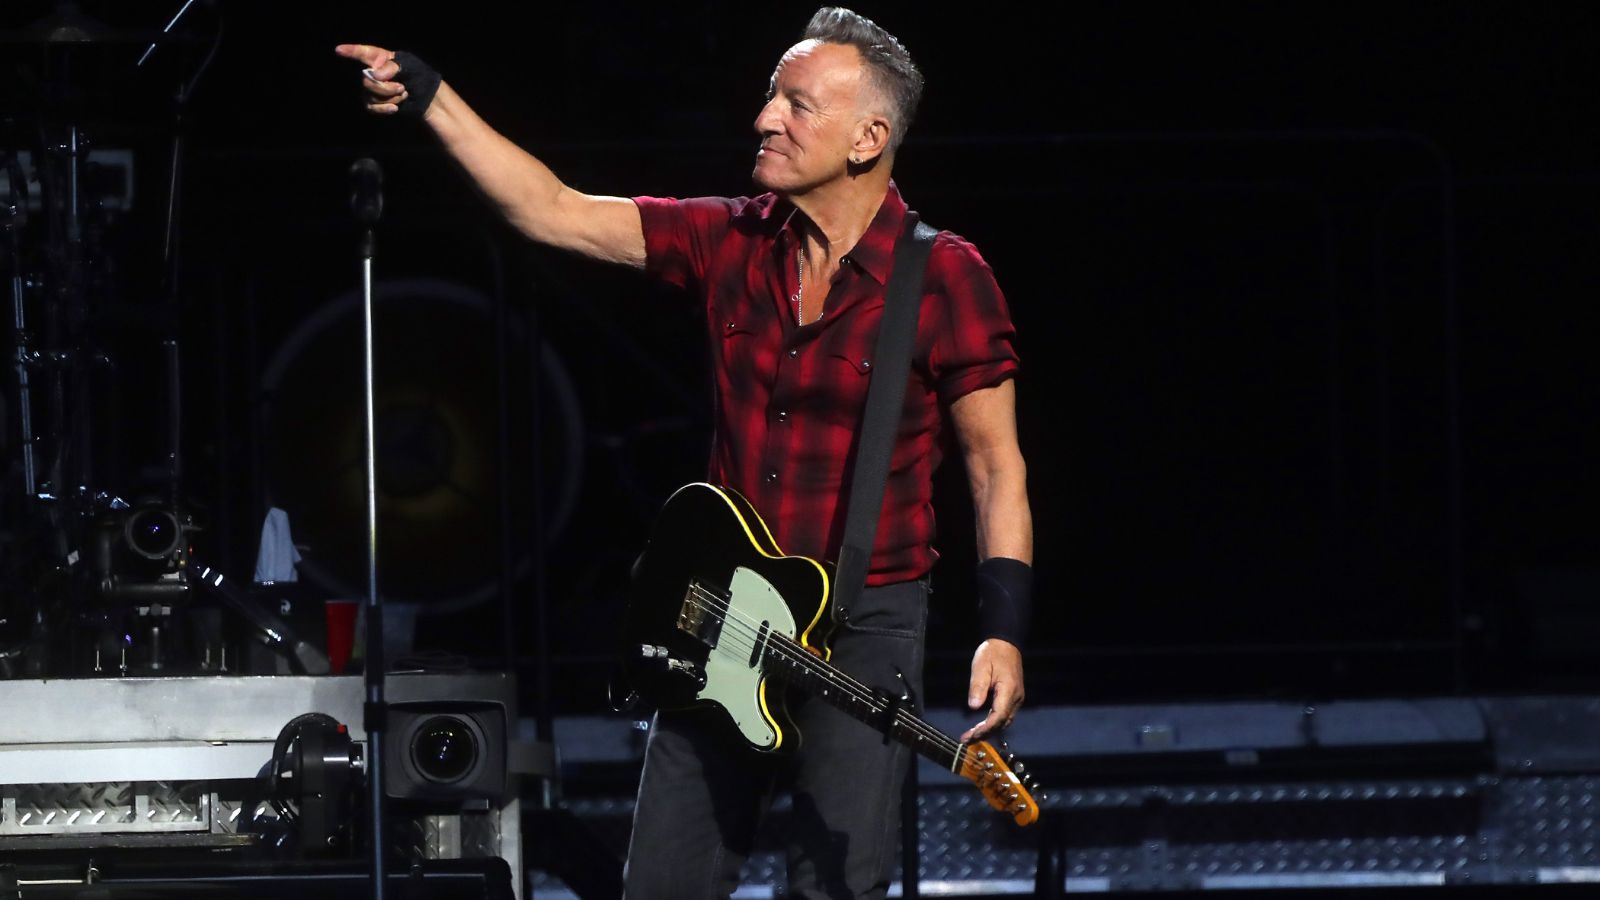 Bruce Springsteen raises money for St. Mary's Food Bank...